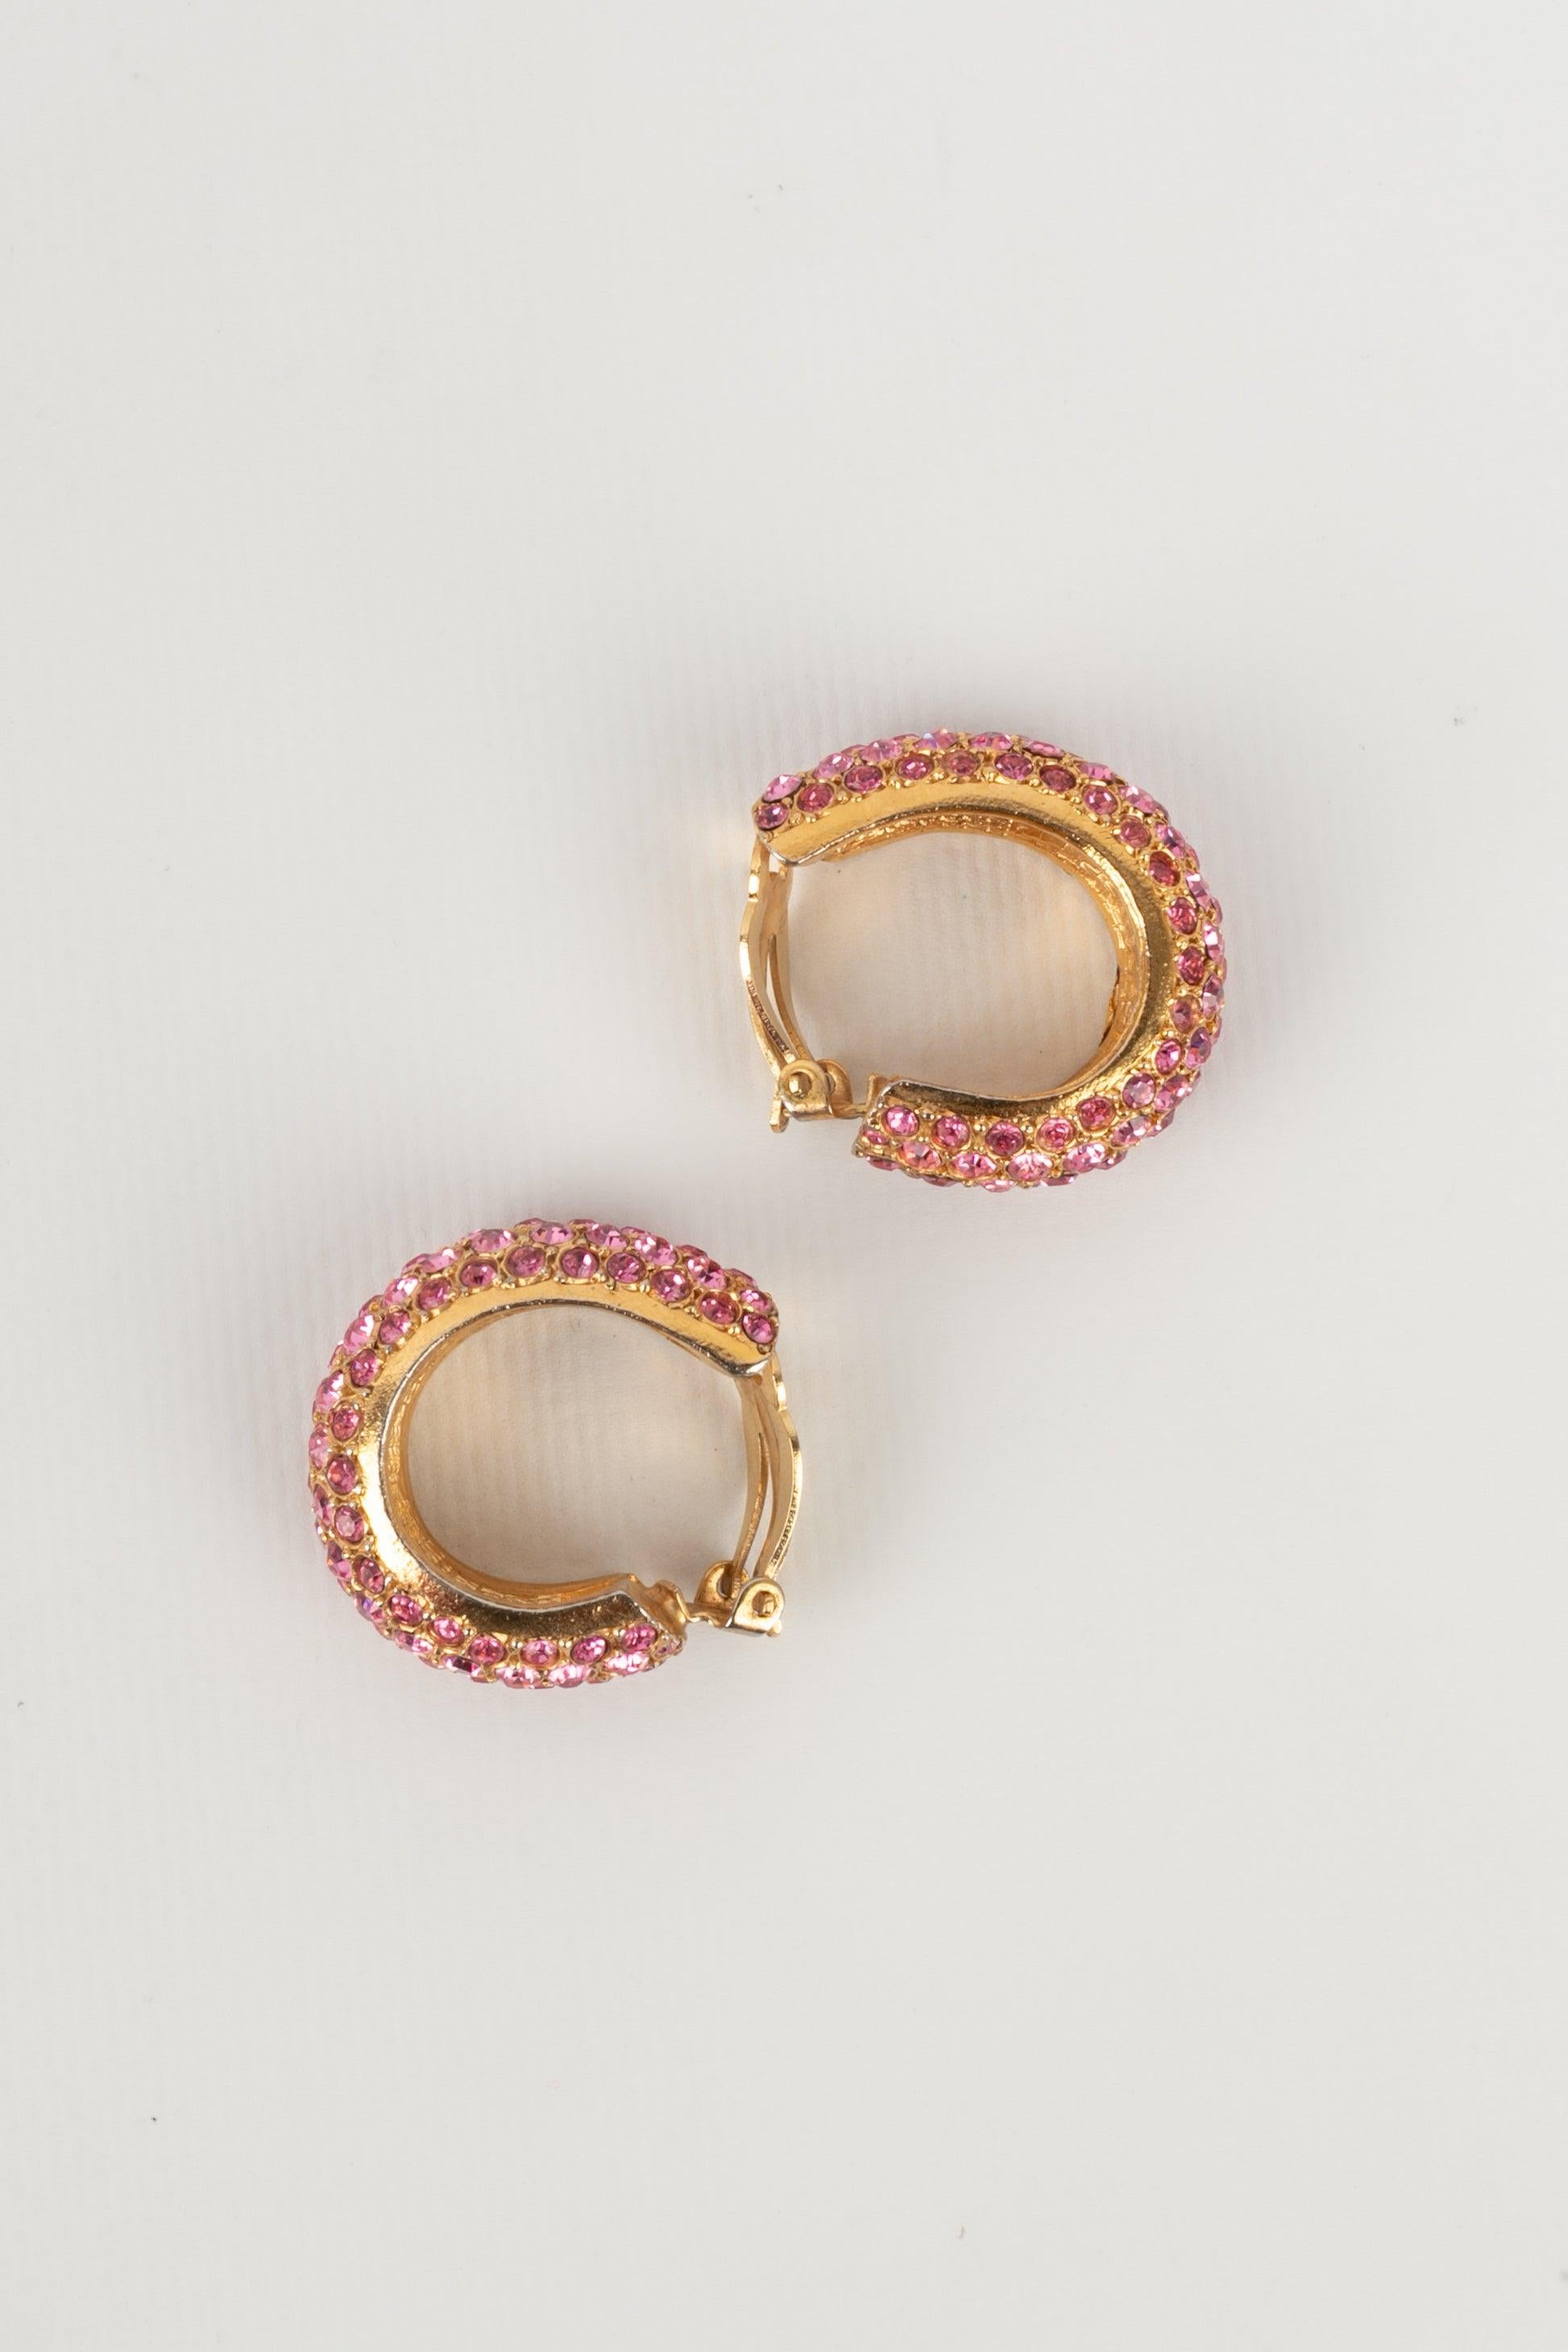 Christian Dior Golden Metal Clip-On Earrings Ornamented with Pink Rhinestones For Sale 1